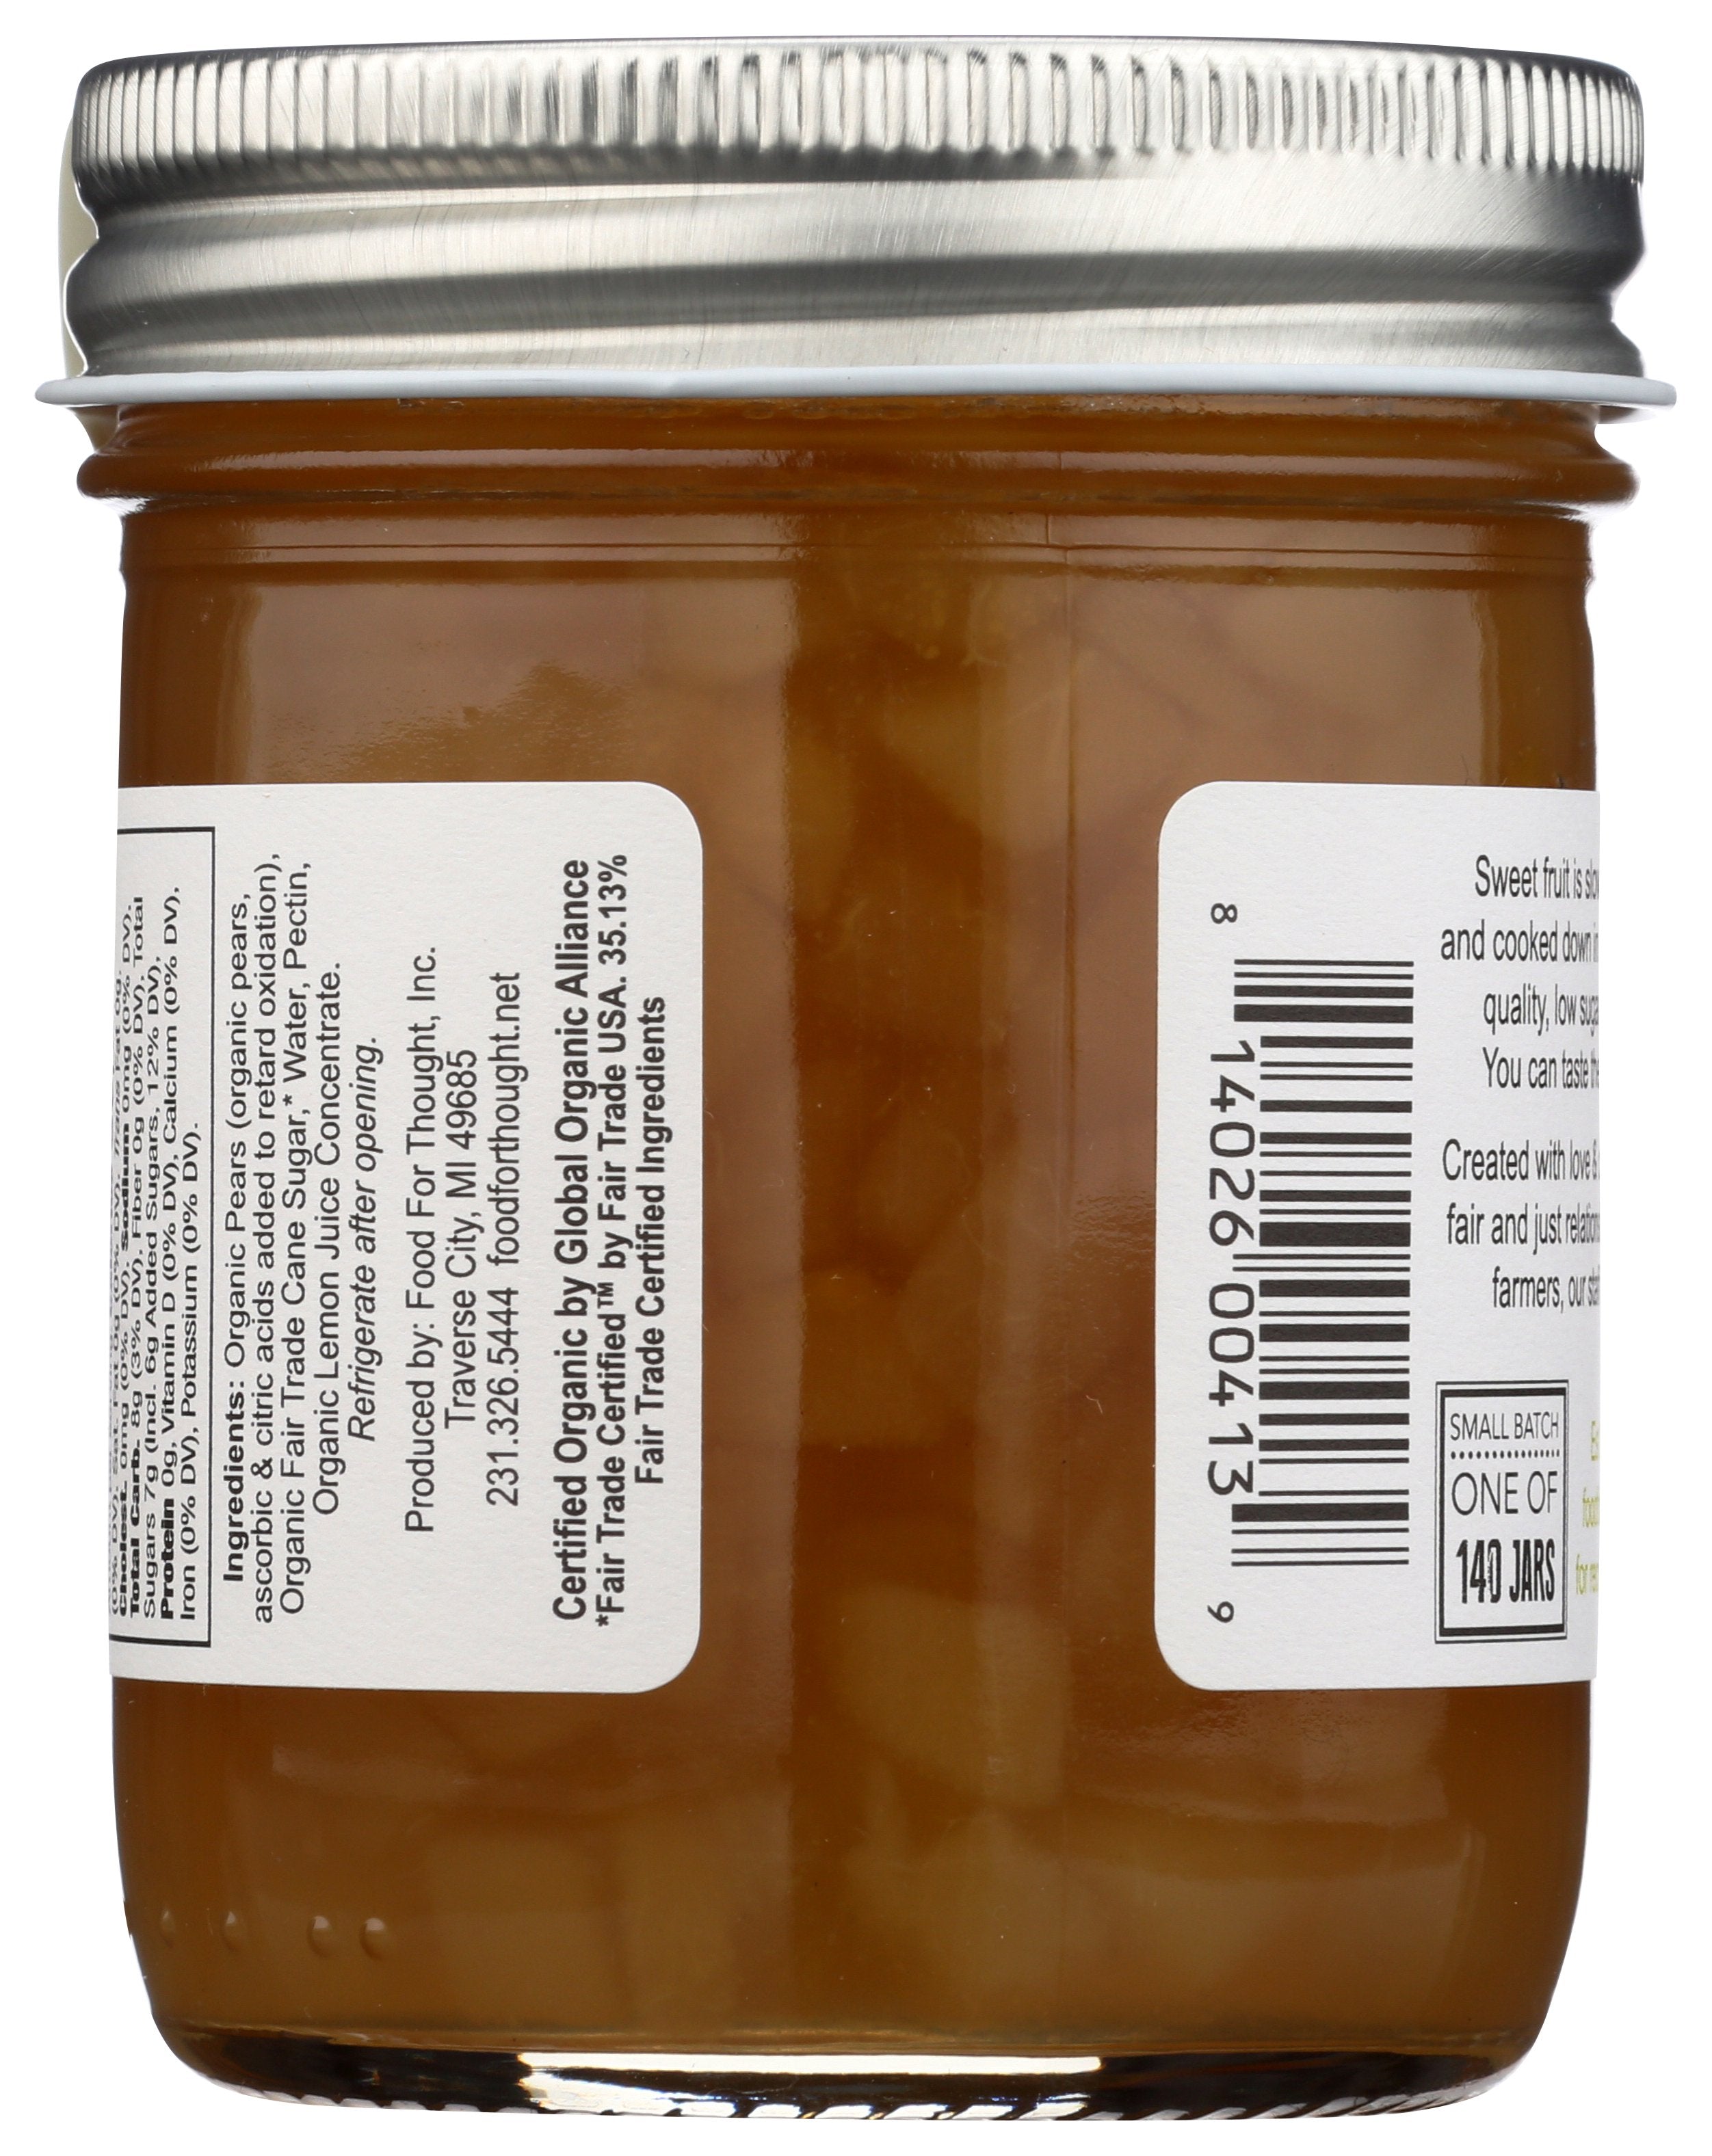 FOOD FOR THOUGHT PRESERVES PEAR ORG - Case of 6